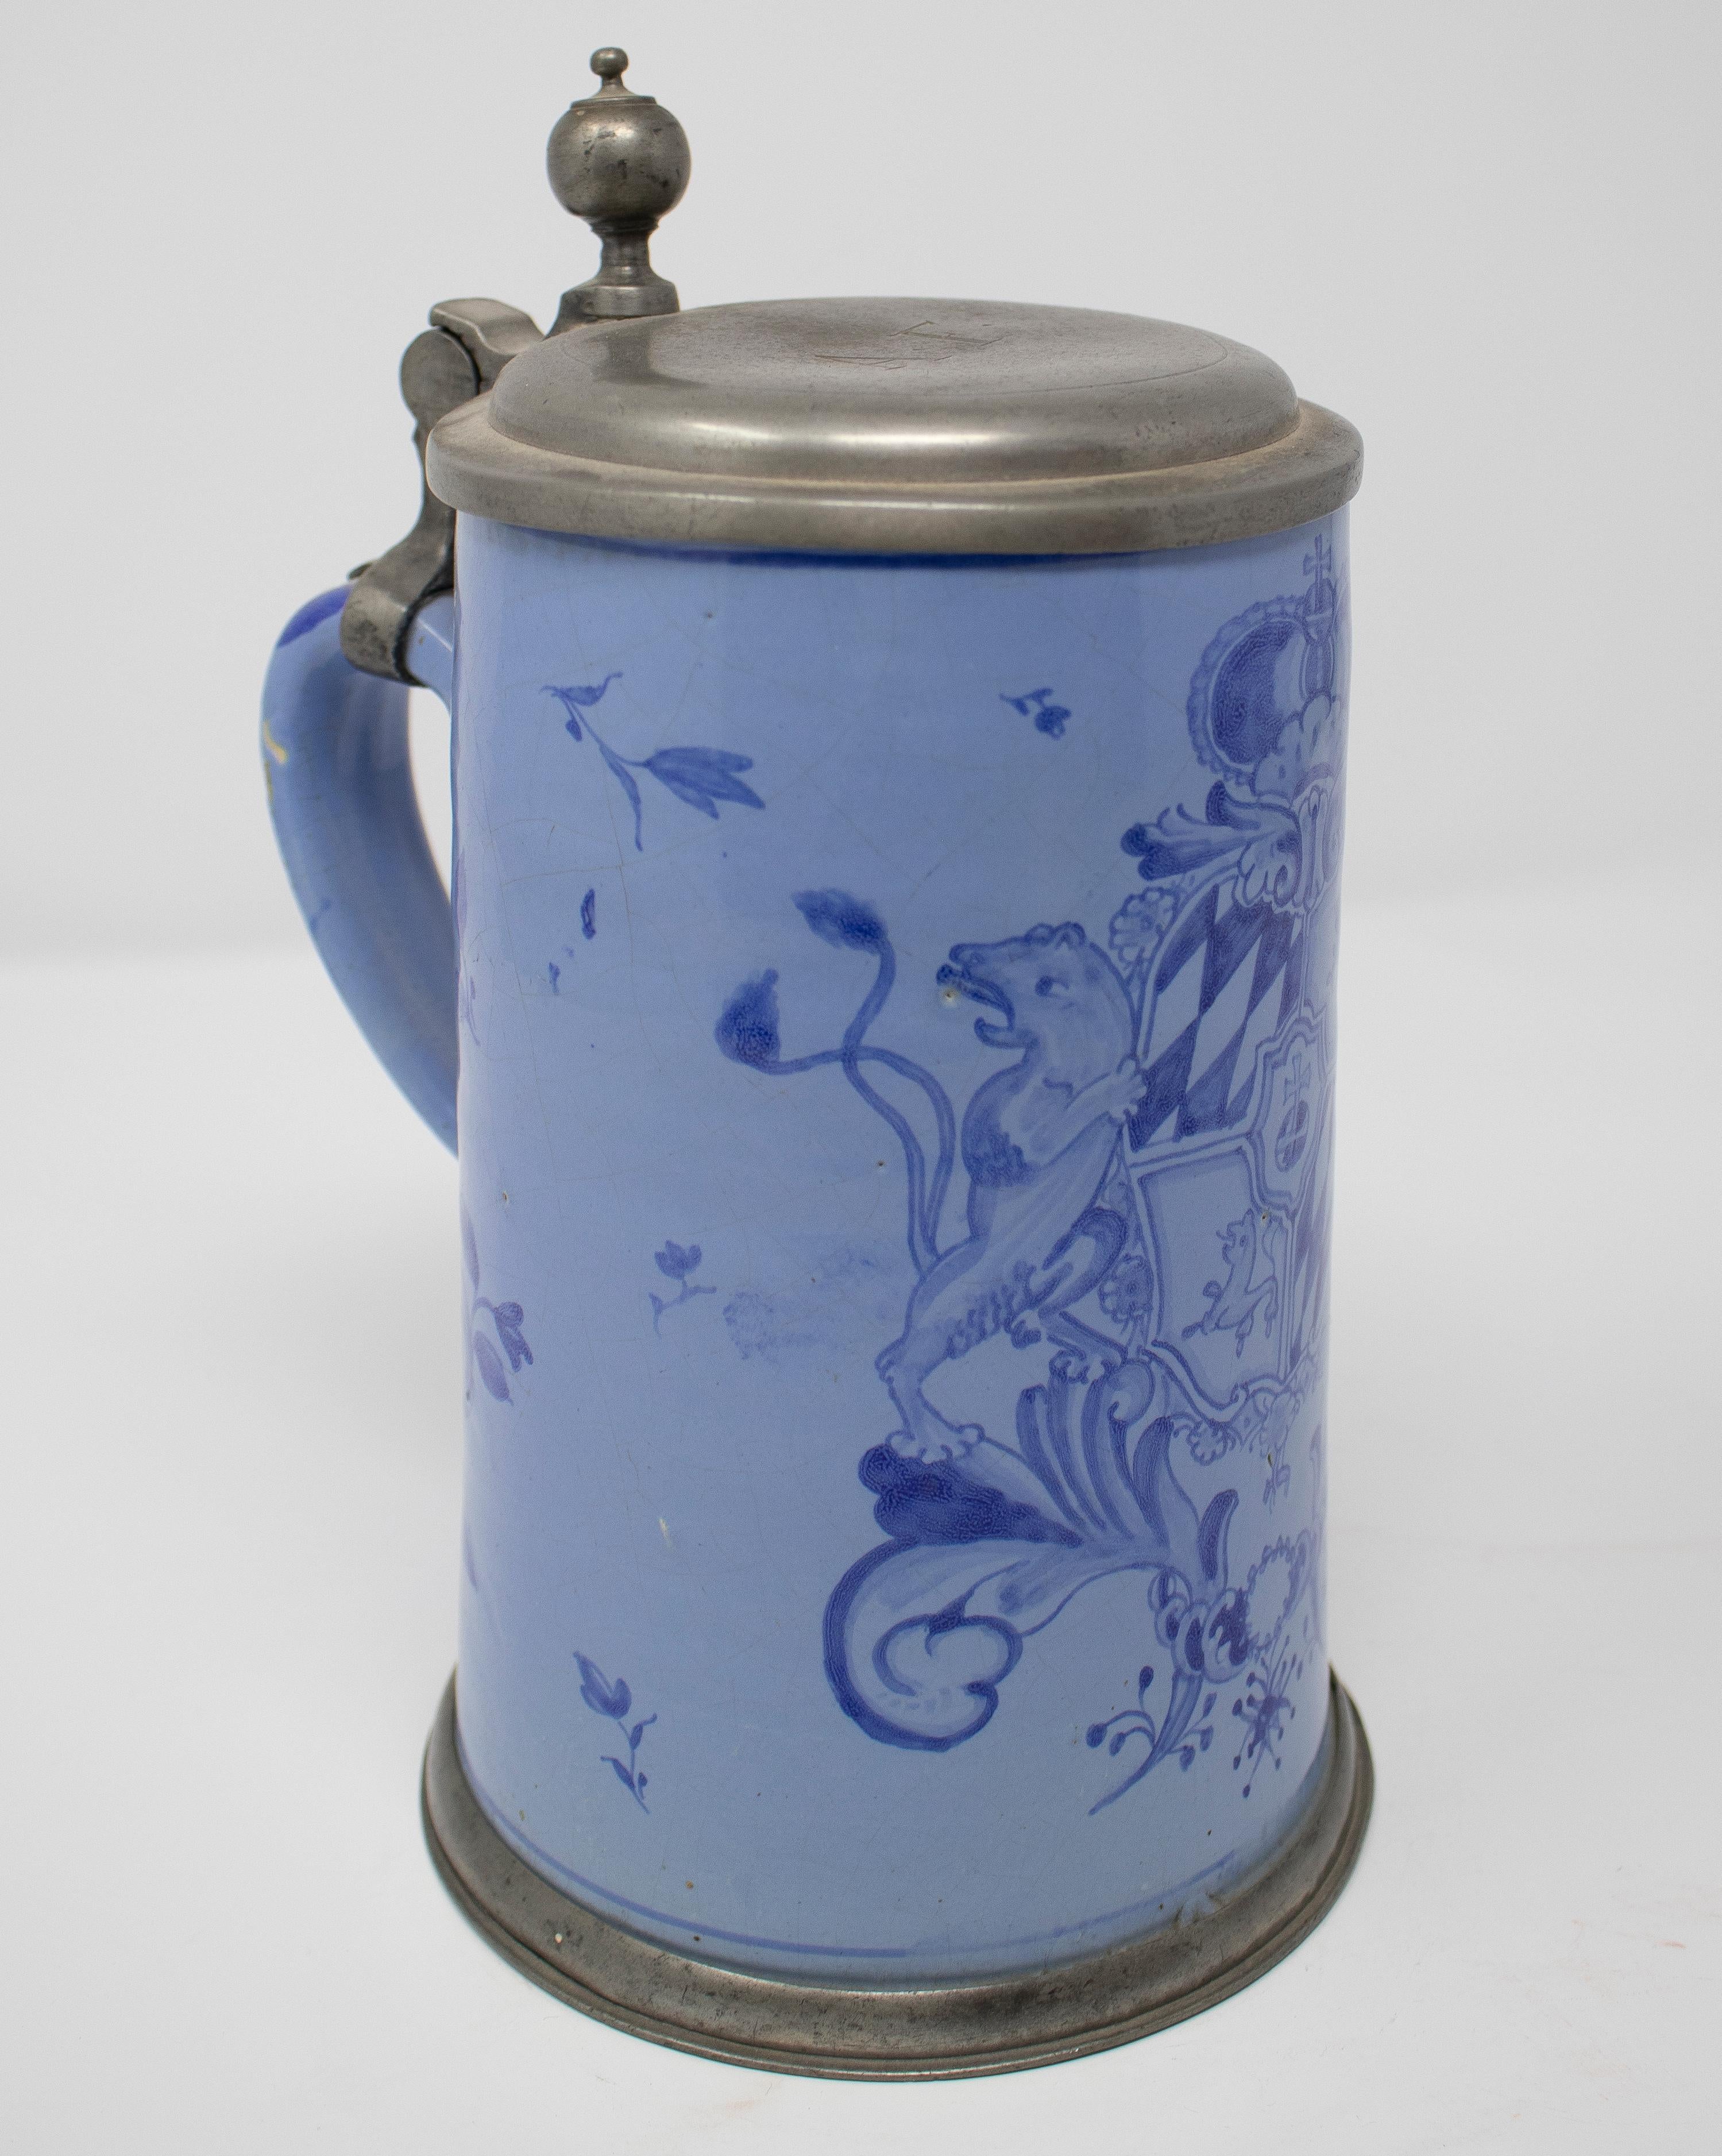 19th century German earthenware beer stein mug with tin lid and cobalt blue plant decoration.